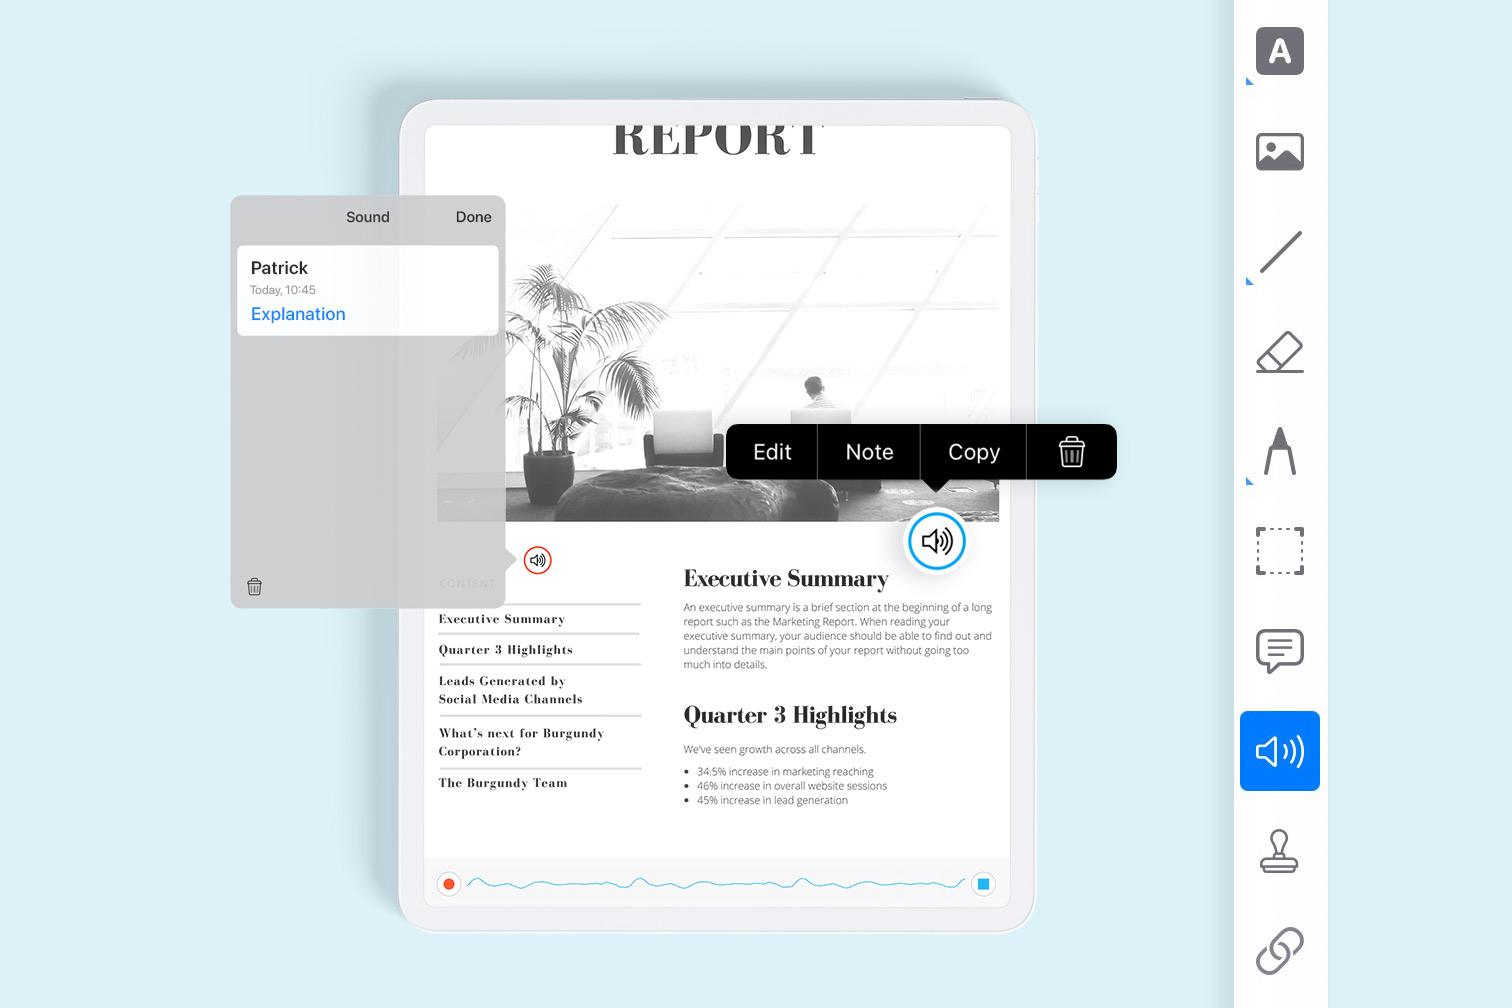 Use your iPad to record your voice to provide feedback on PDF documents